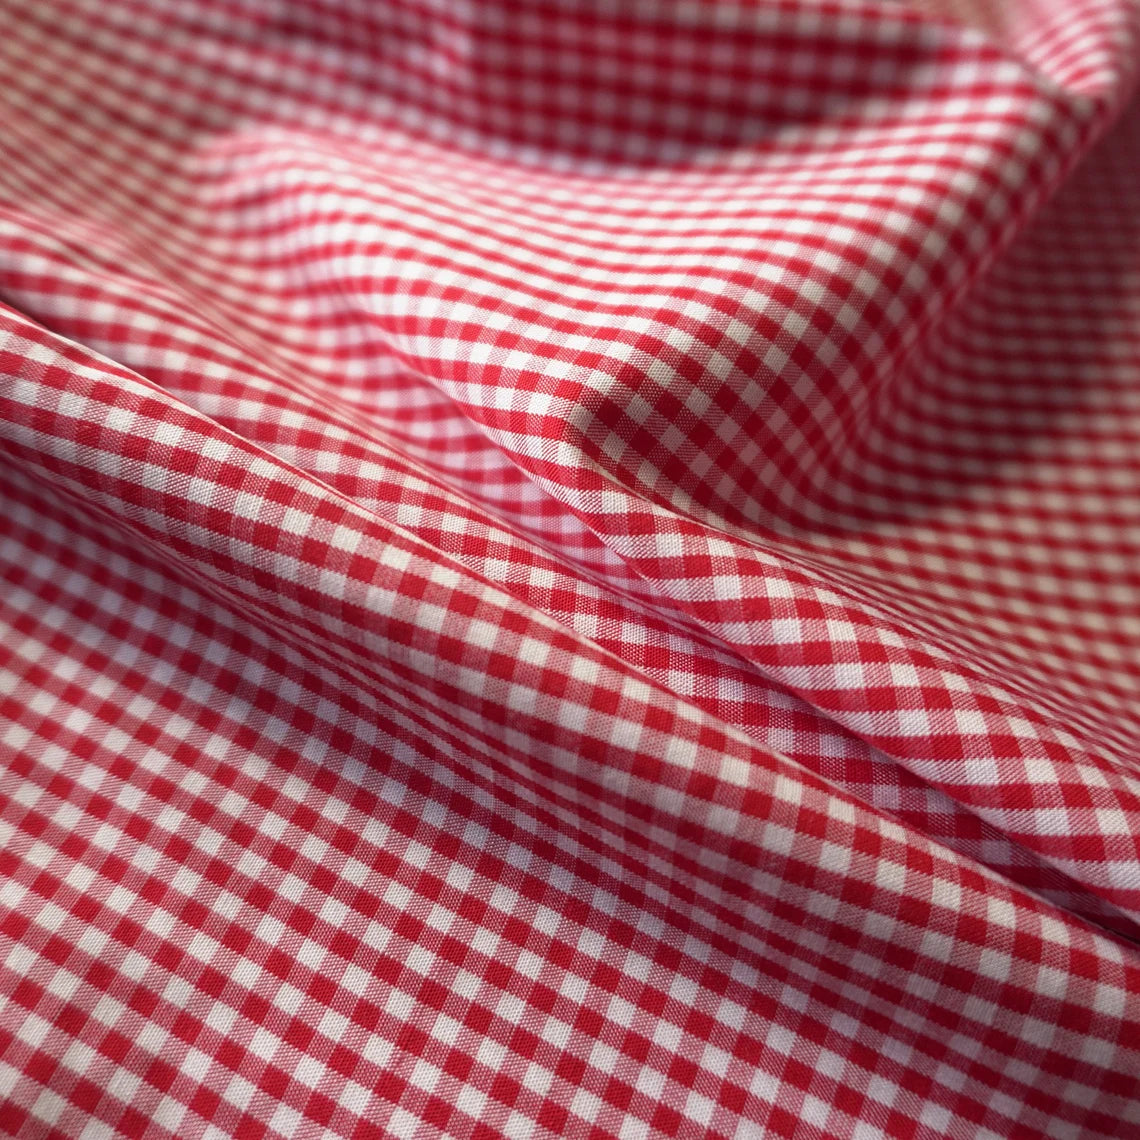 Cherry Red Gingham Tencel Viscose Fabric - Eco-Friendly, Smooth & Drapable | PRICED PER METER